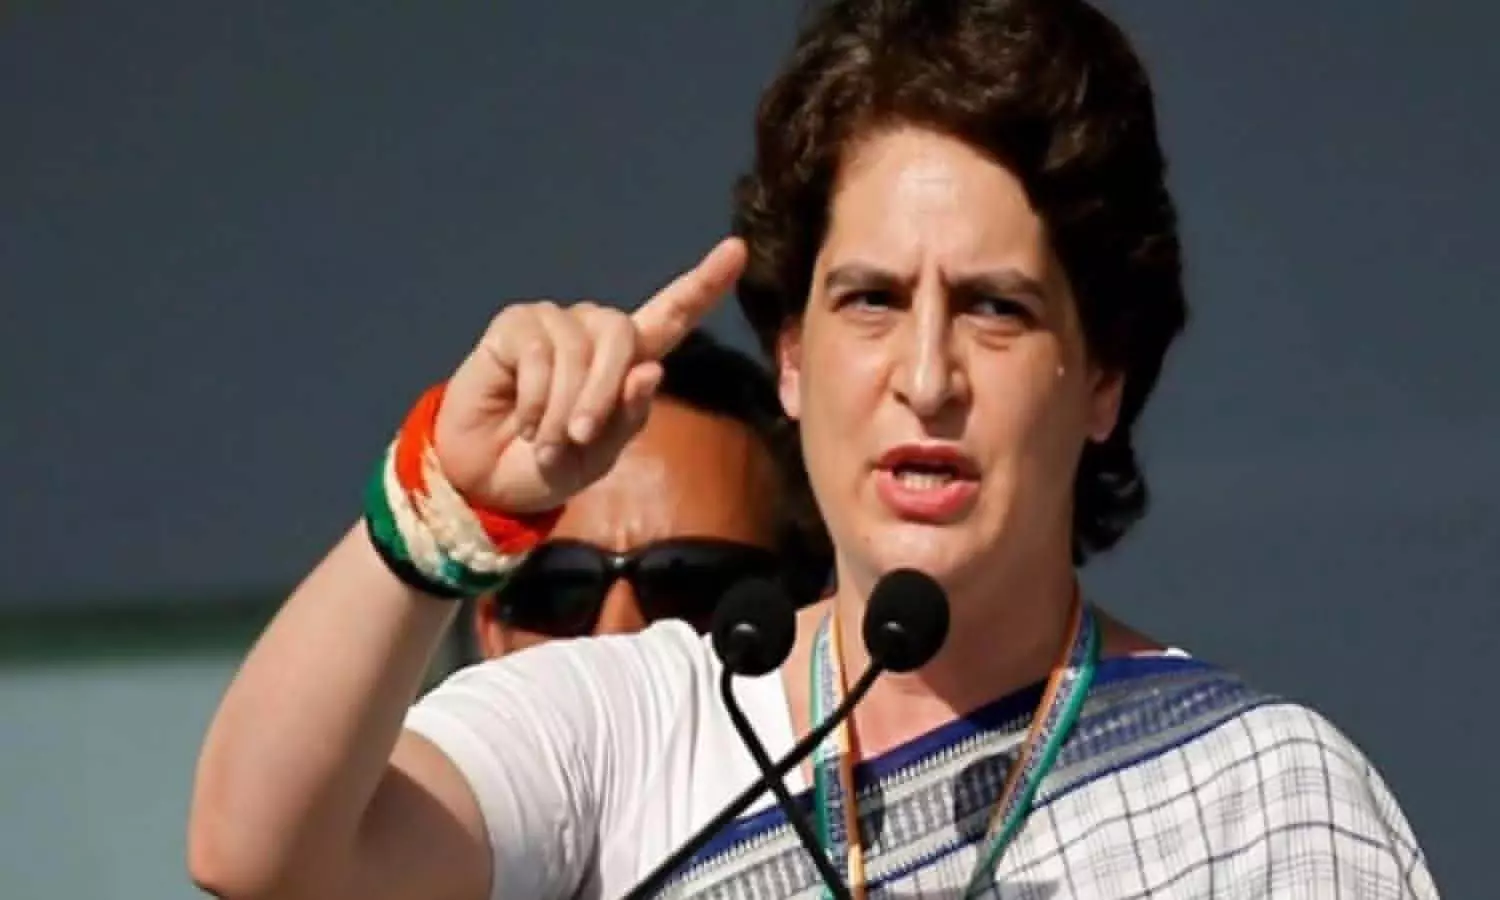 Priyanka Gandhi wrote a letter to the CM of UP